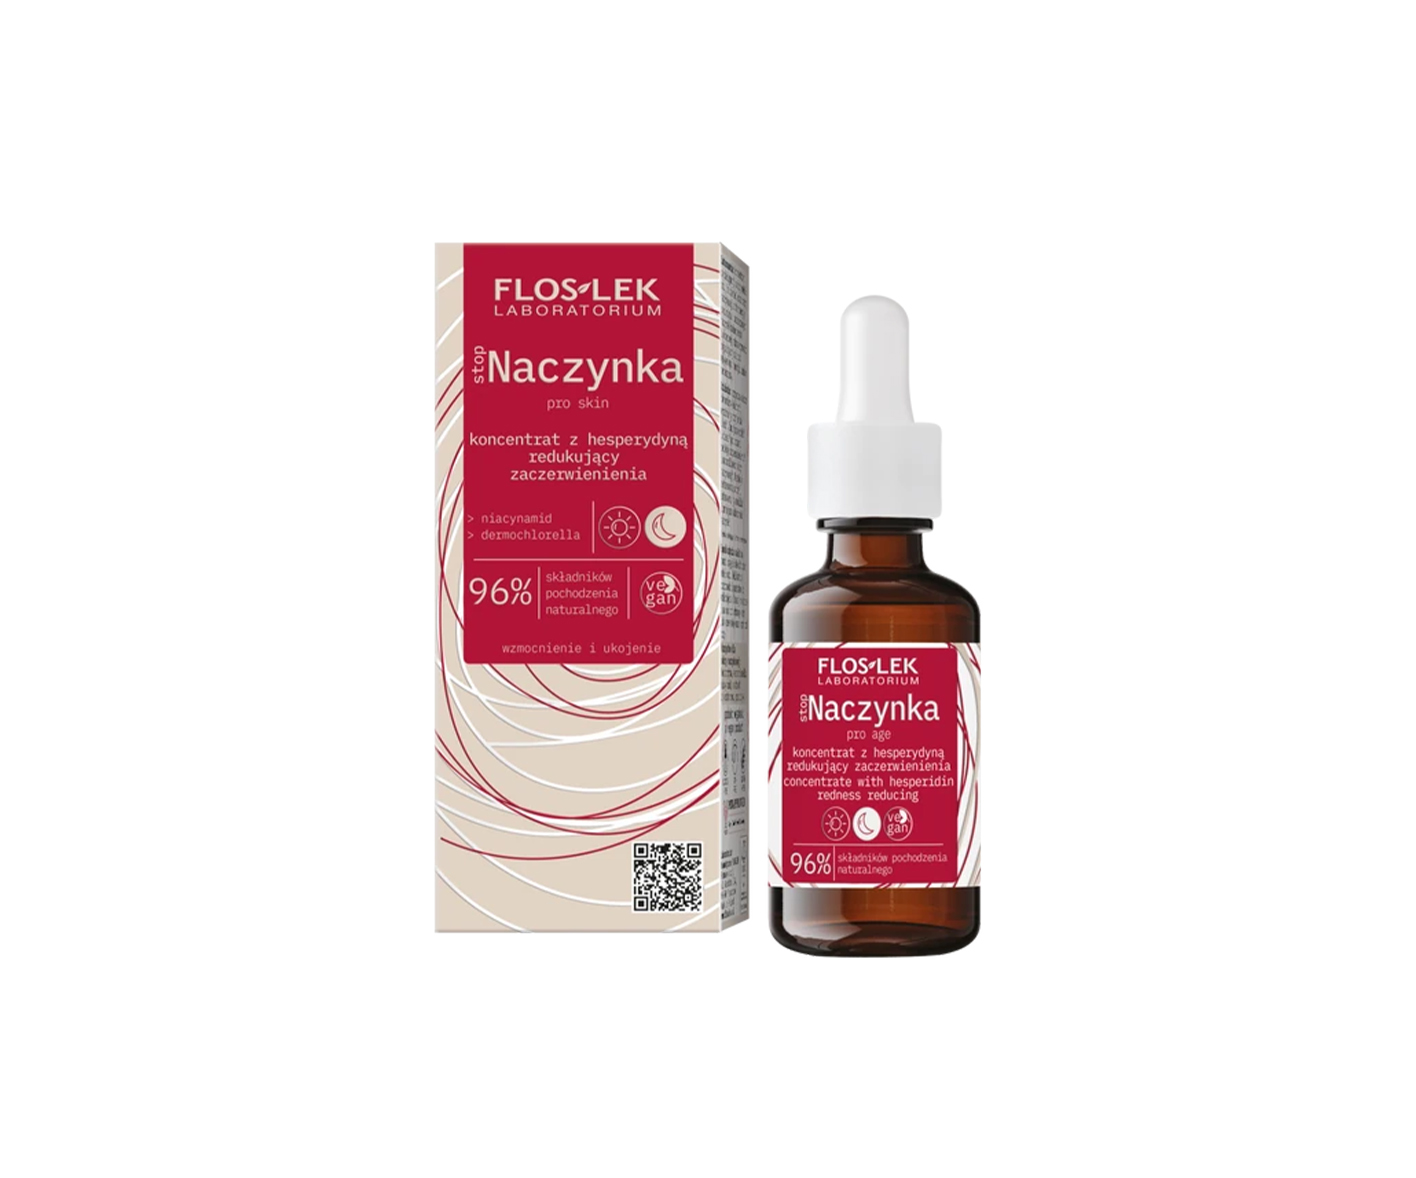 Floslek, stopNaczynka concentrate with hesperidin reducing redness, serum for broken capillaries on the face